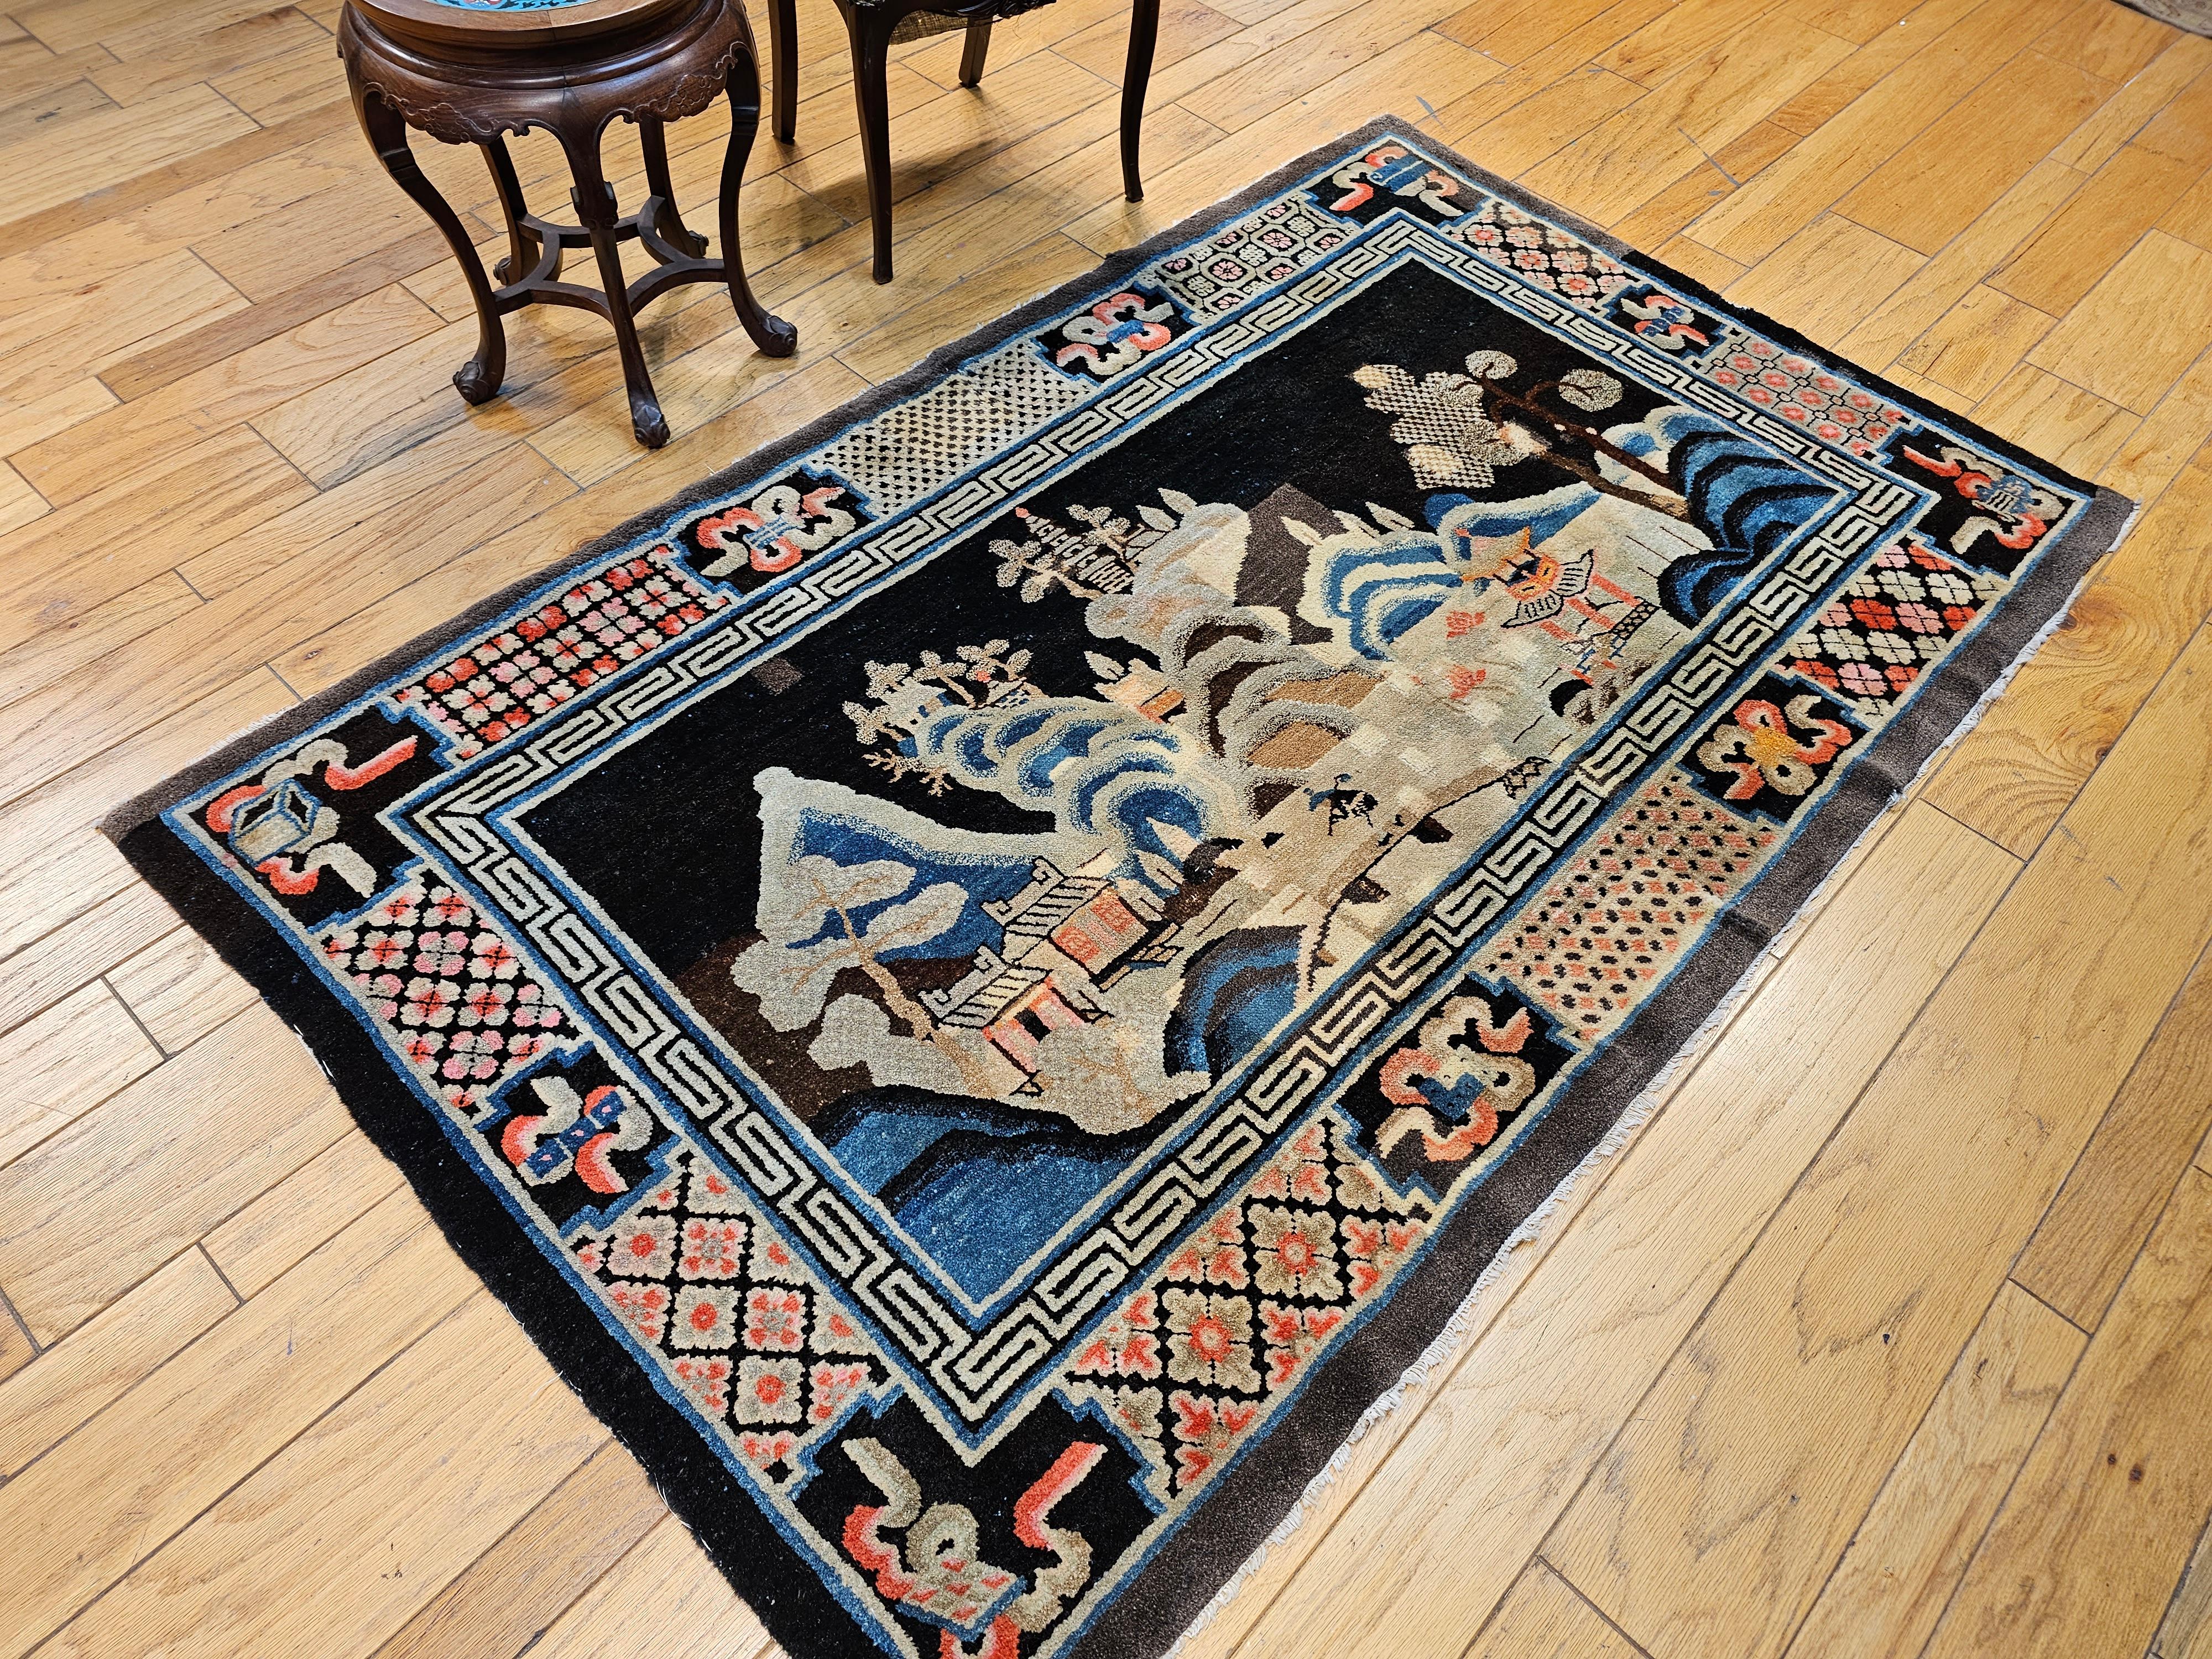 Late 1800s Ningxia Chinese Rug with A Pictorial Design of Forest, Mountains For Sale 7